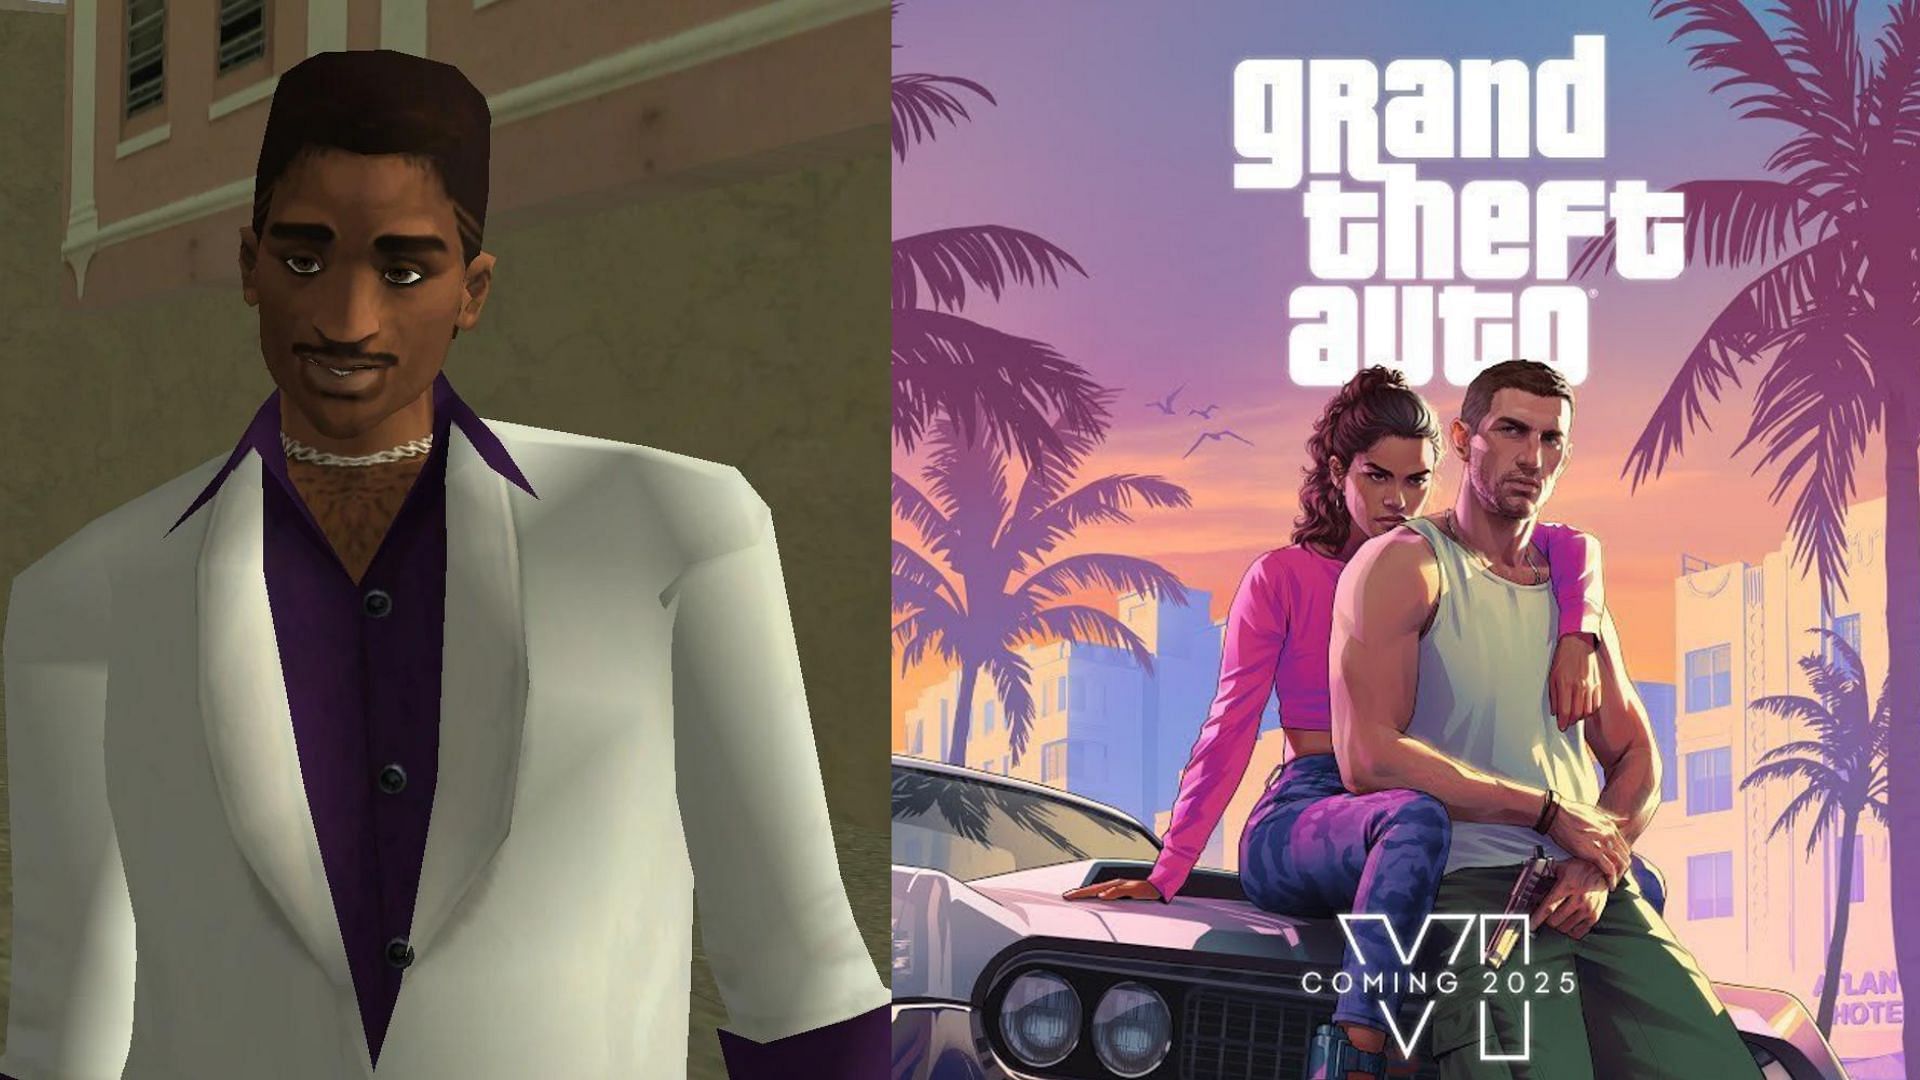 Gta 6 Will Have A Lance Vance Character Reference From Gta Vice City Rumor Explored 2999